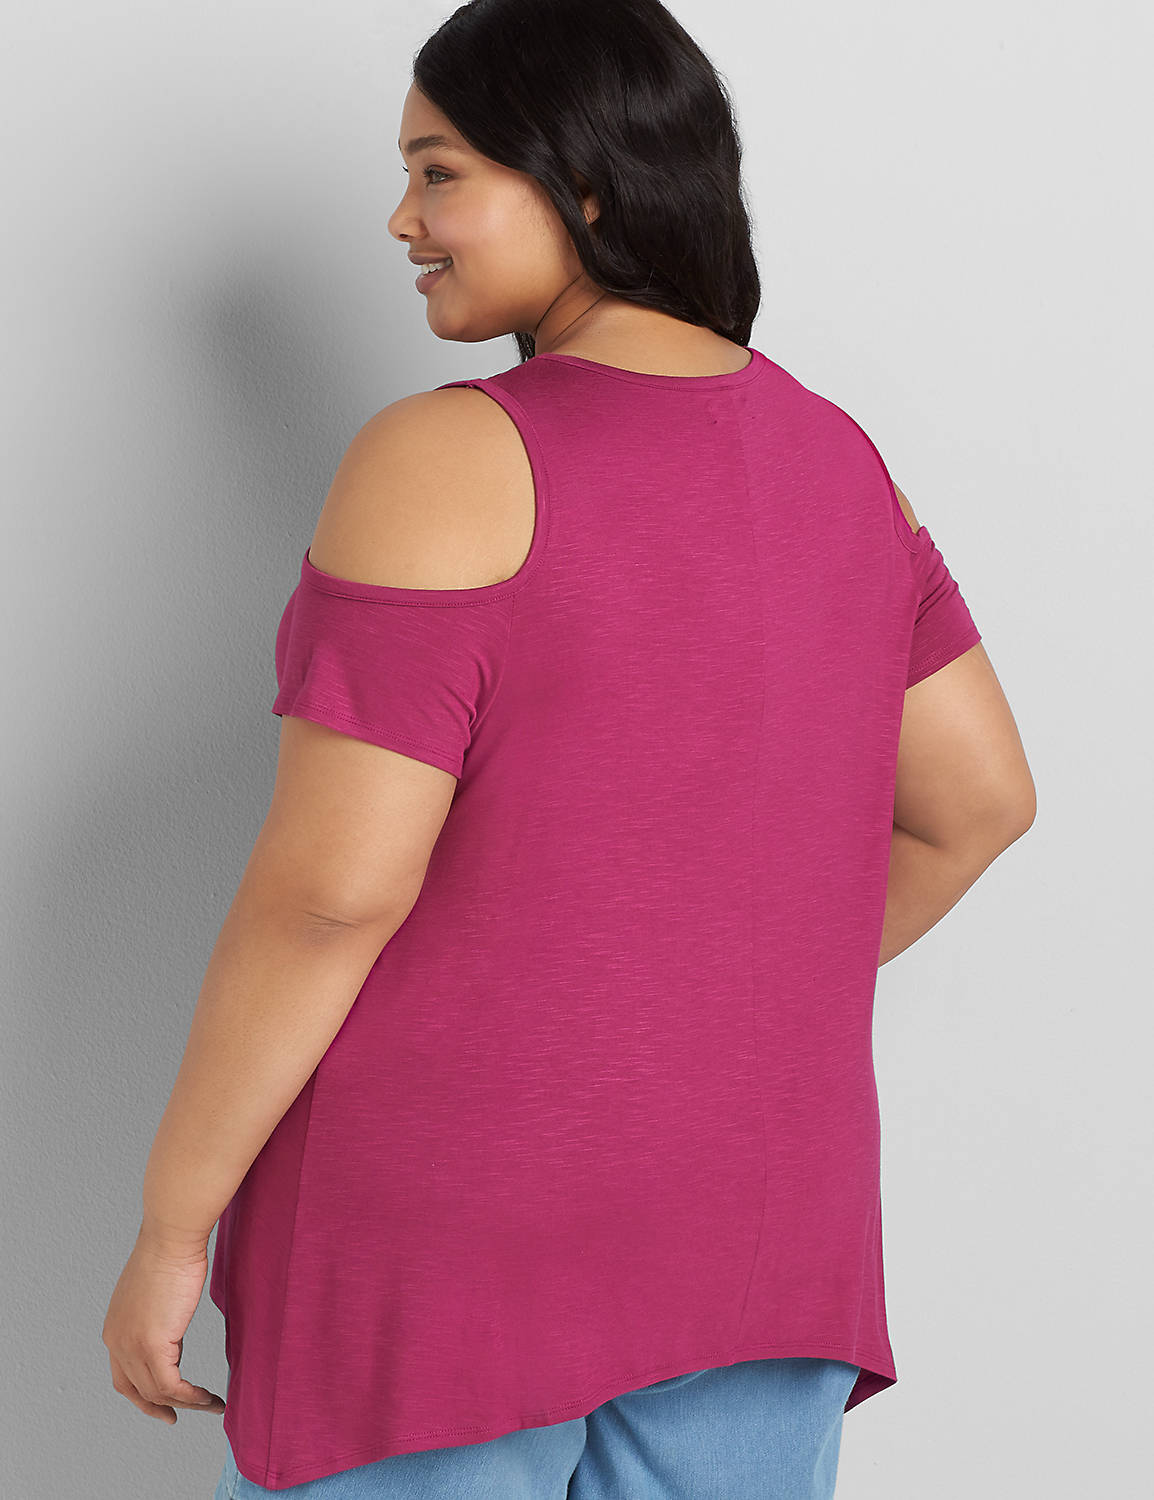 Cold-Shoulder Swing Tee with Perforated Neckline Product Image 2